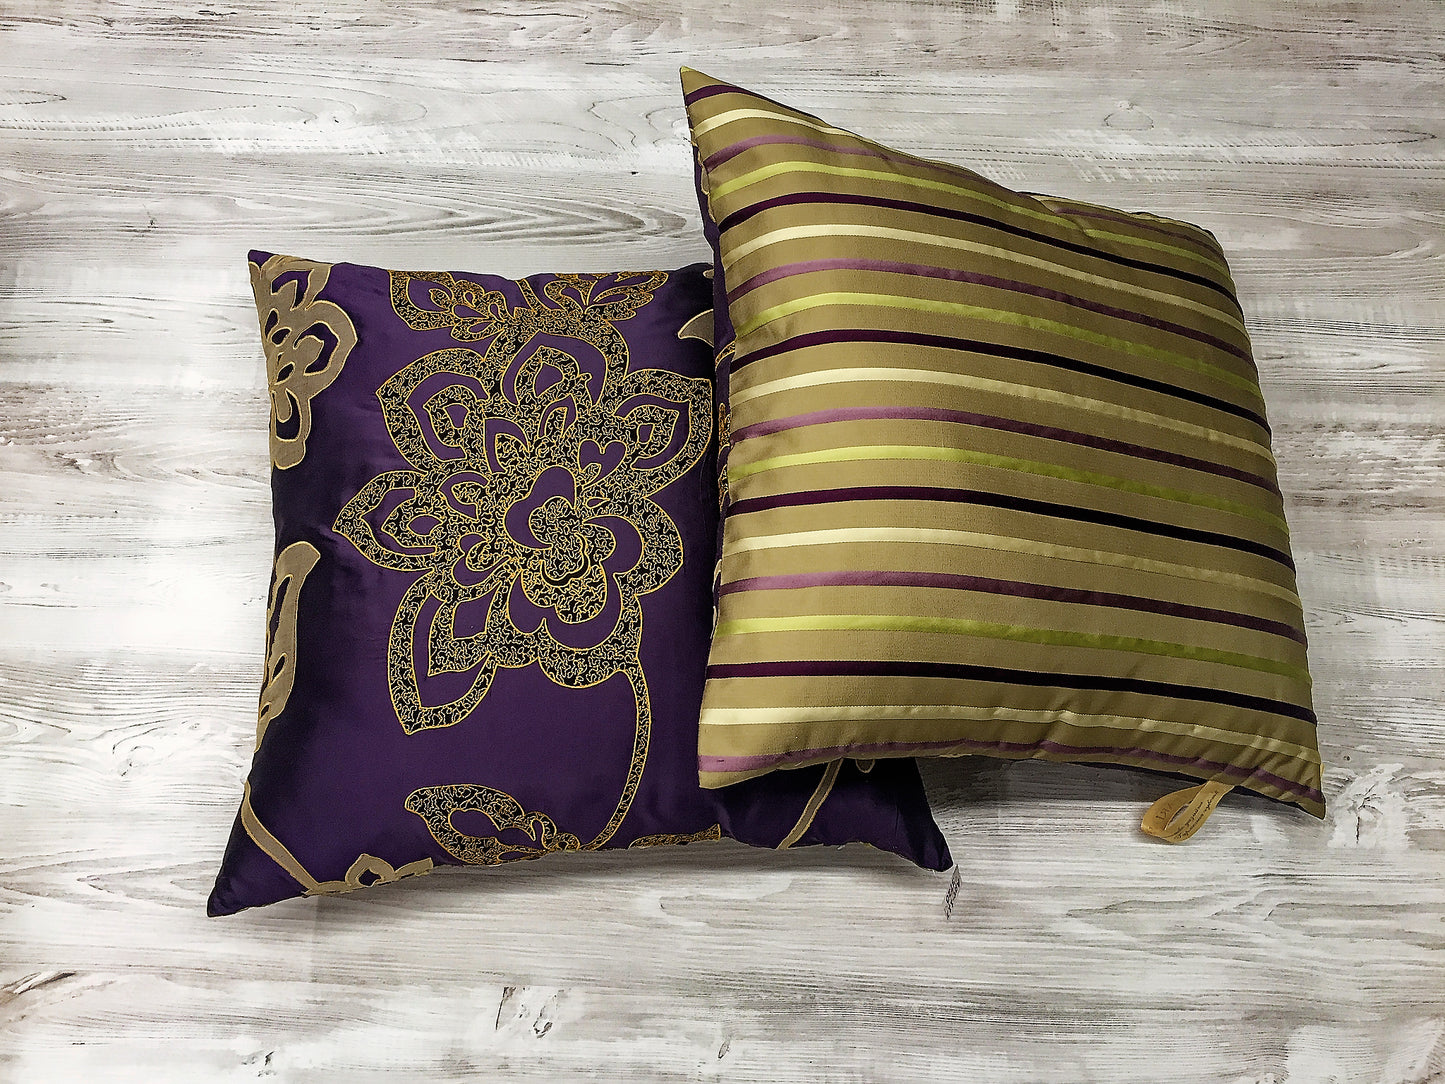 Luxury cushion collection "Flori Embroidery" Set of 3 Cushions